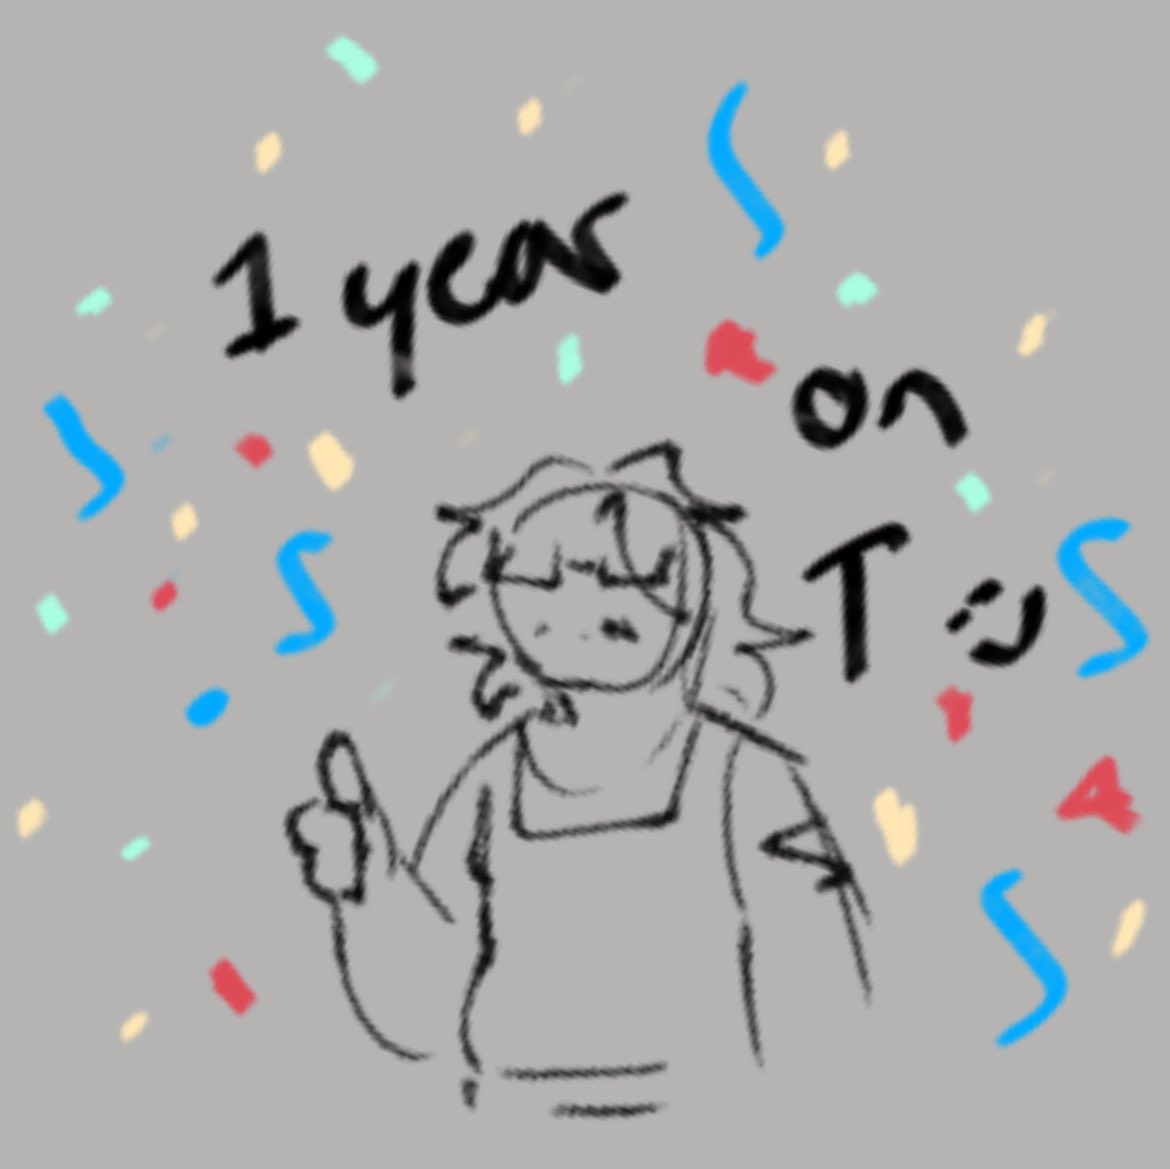 also i’m 1 year on T now lmao rare Leon irl posting. i have officially been boyjuiced up for 365 days let’s go #hazytwt